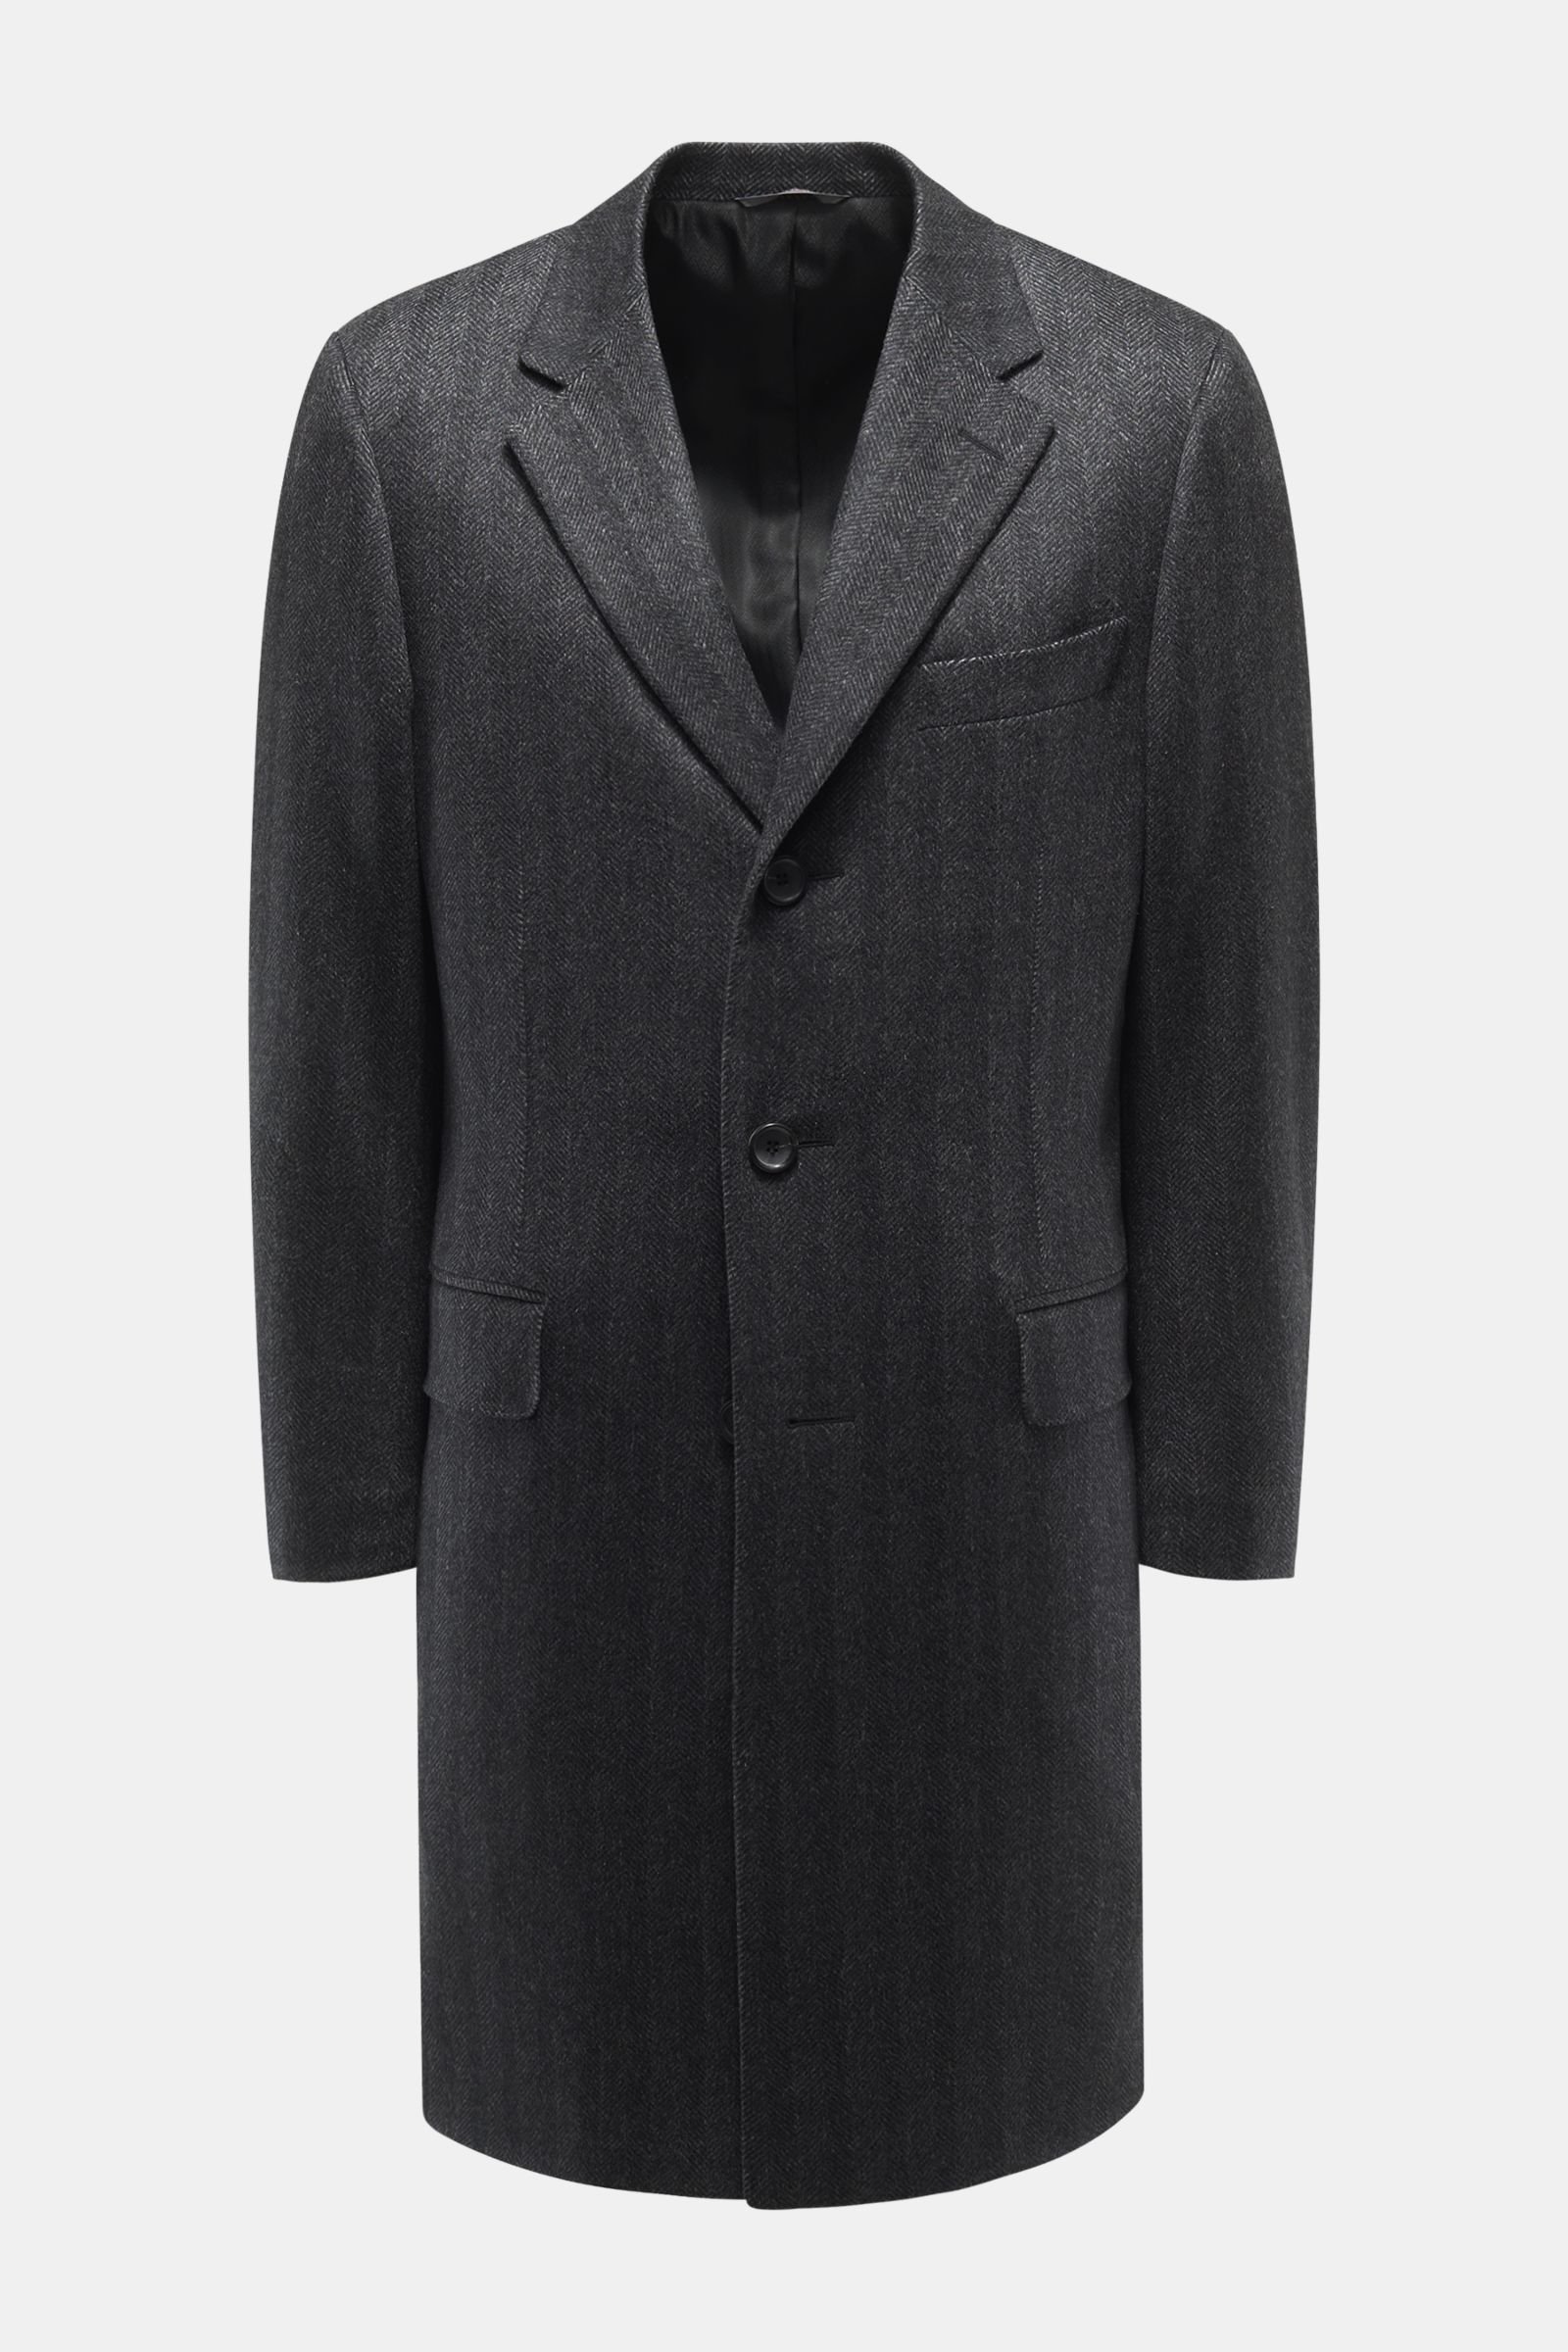 Cashmere coat anthracite patterned